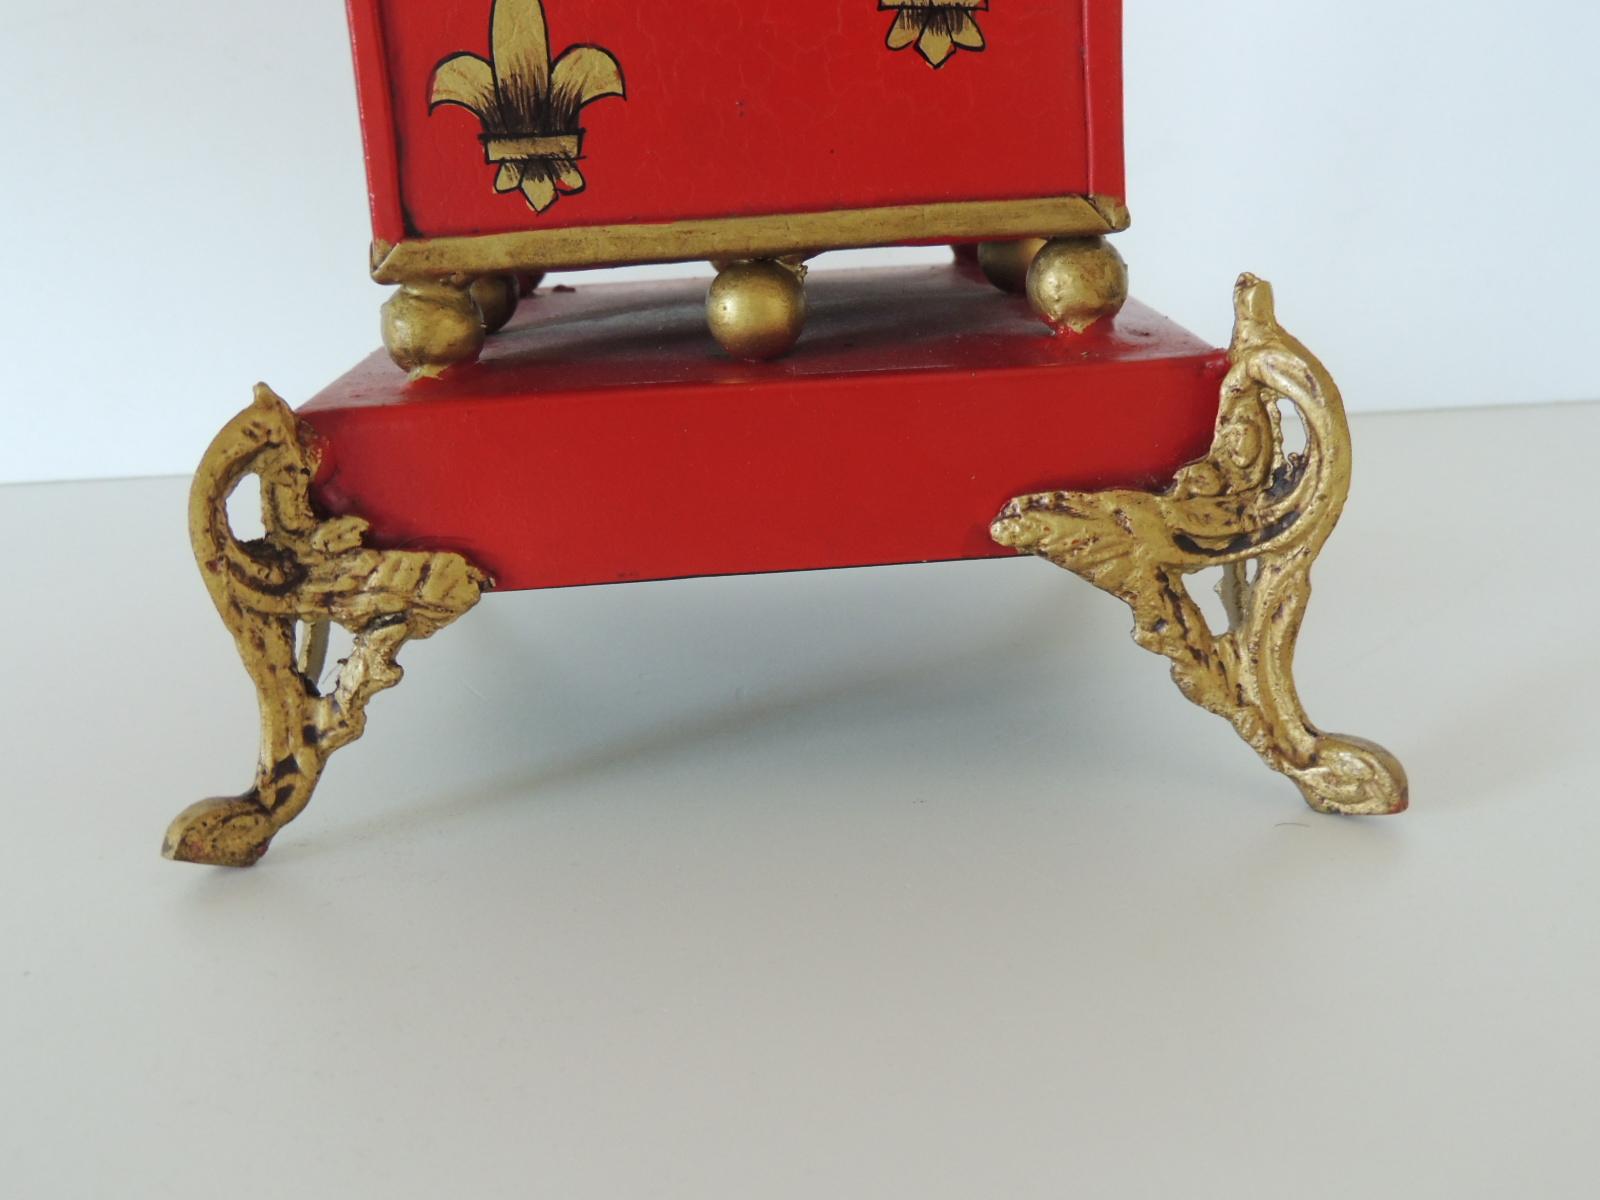 Regency Red and Gold Tall Cachepot with Fleur-de-Lis Design